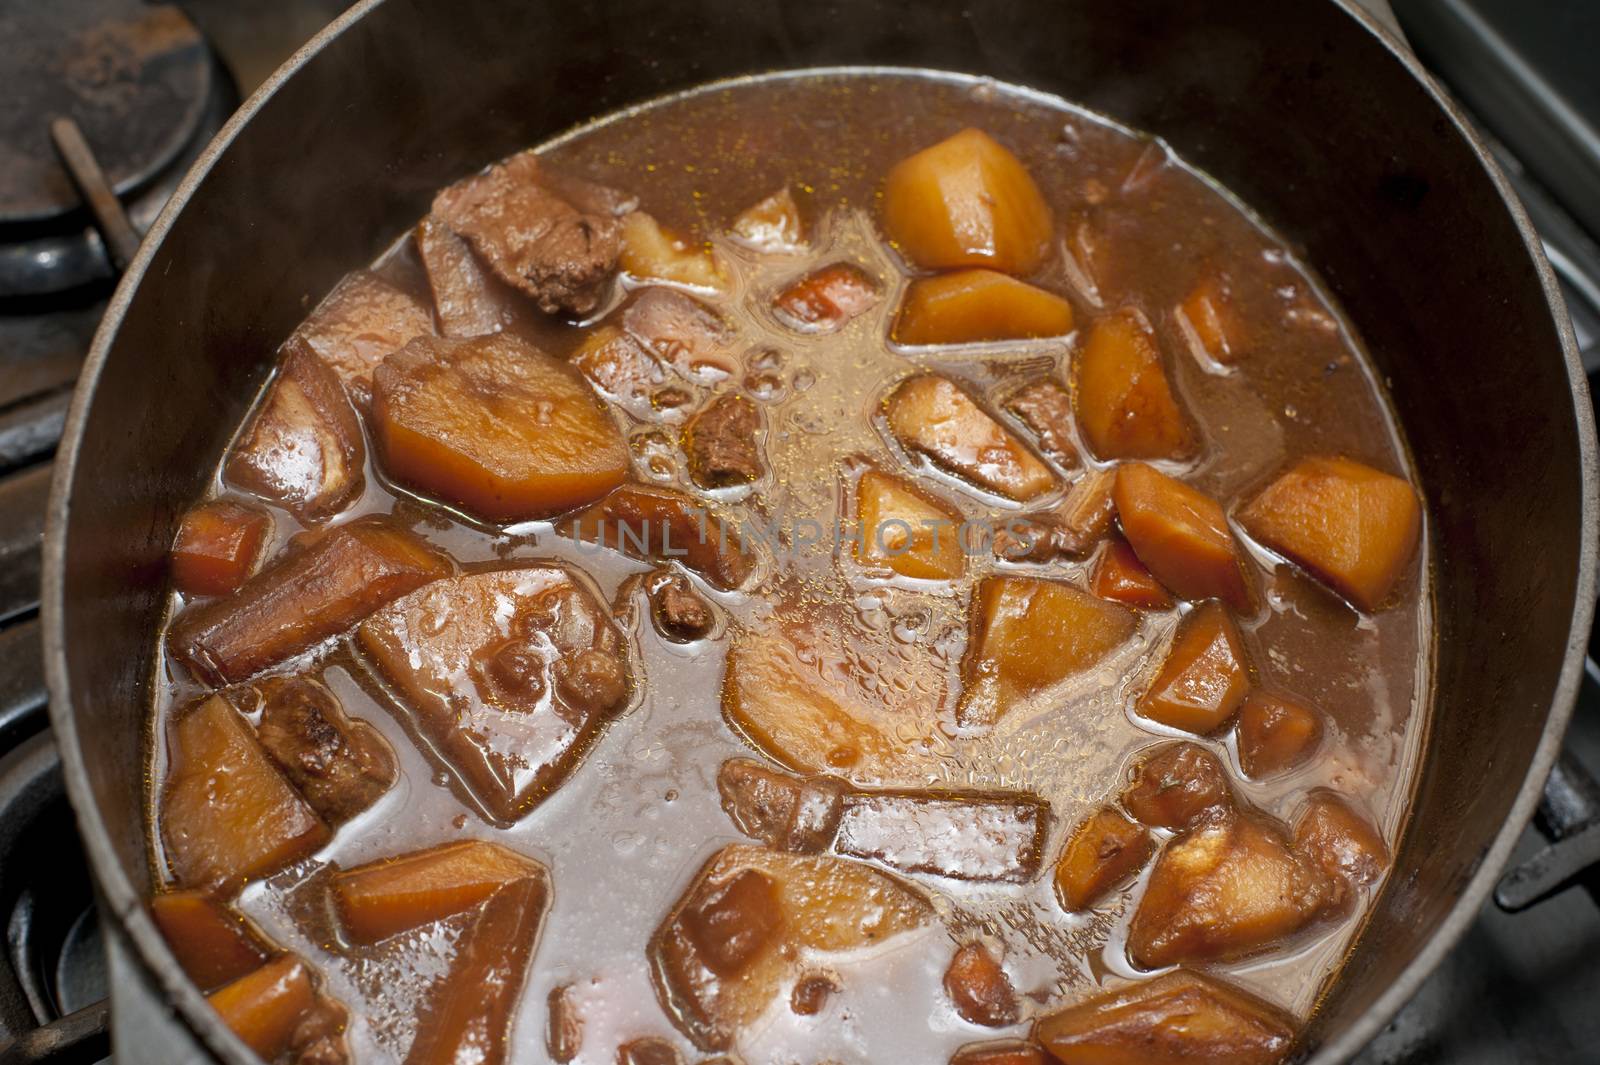 Tasty stew or hot pot with cubed lamb or beef in a rich gravy with carrots and potatoes, viewed from above in a pot ready for serving